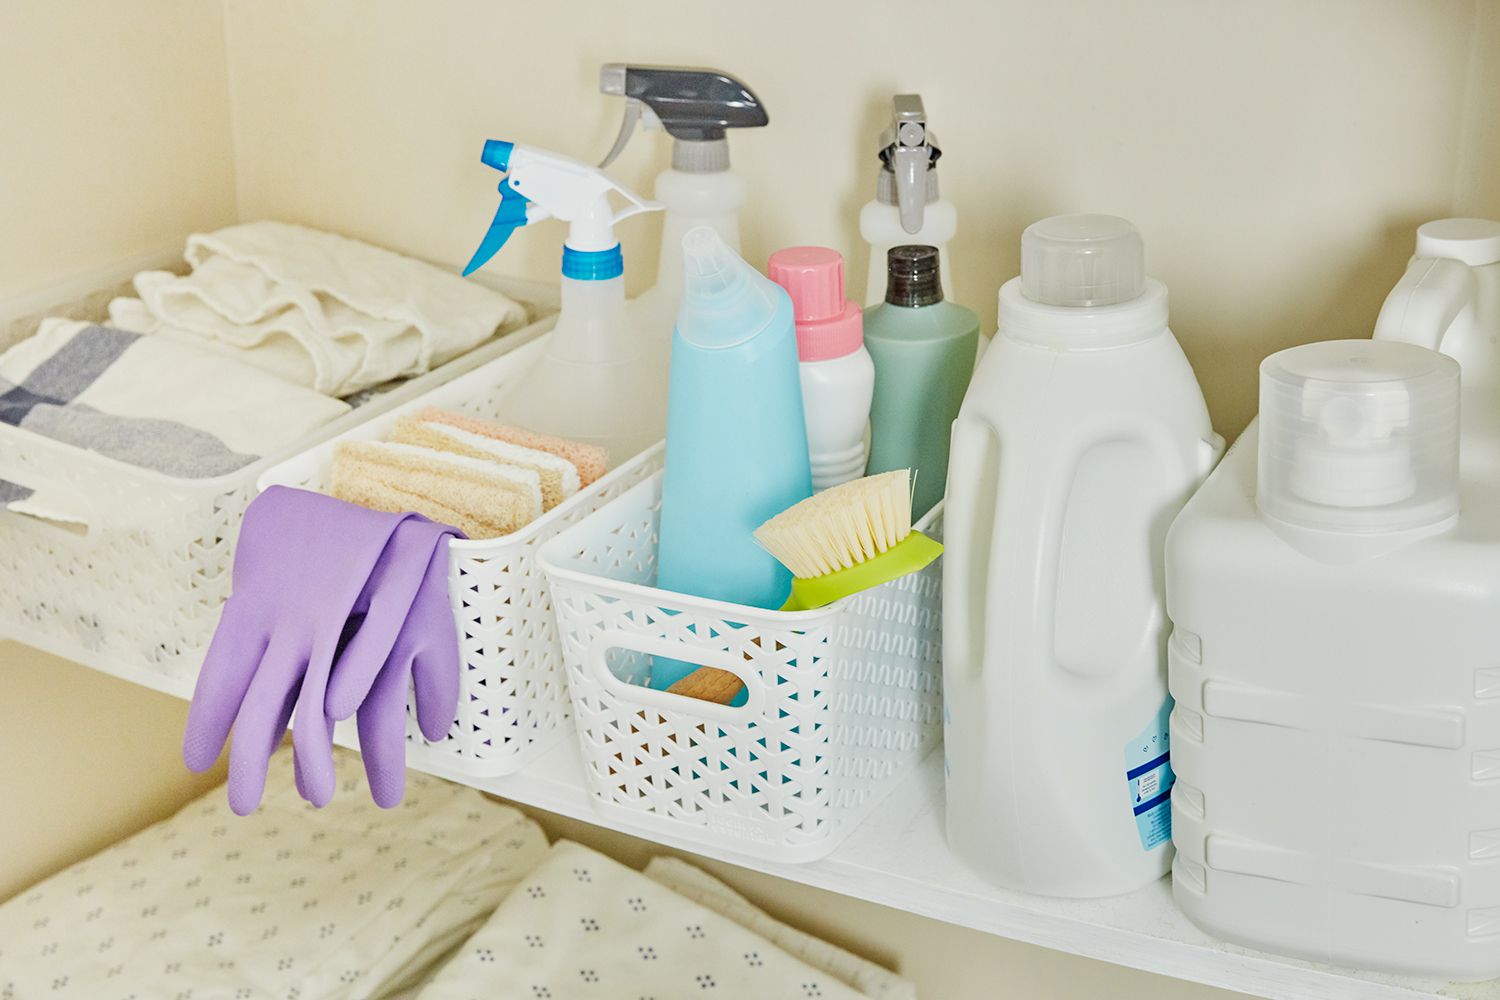 8 Bad Cleaning Habits It's Time to Say Goodbye To